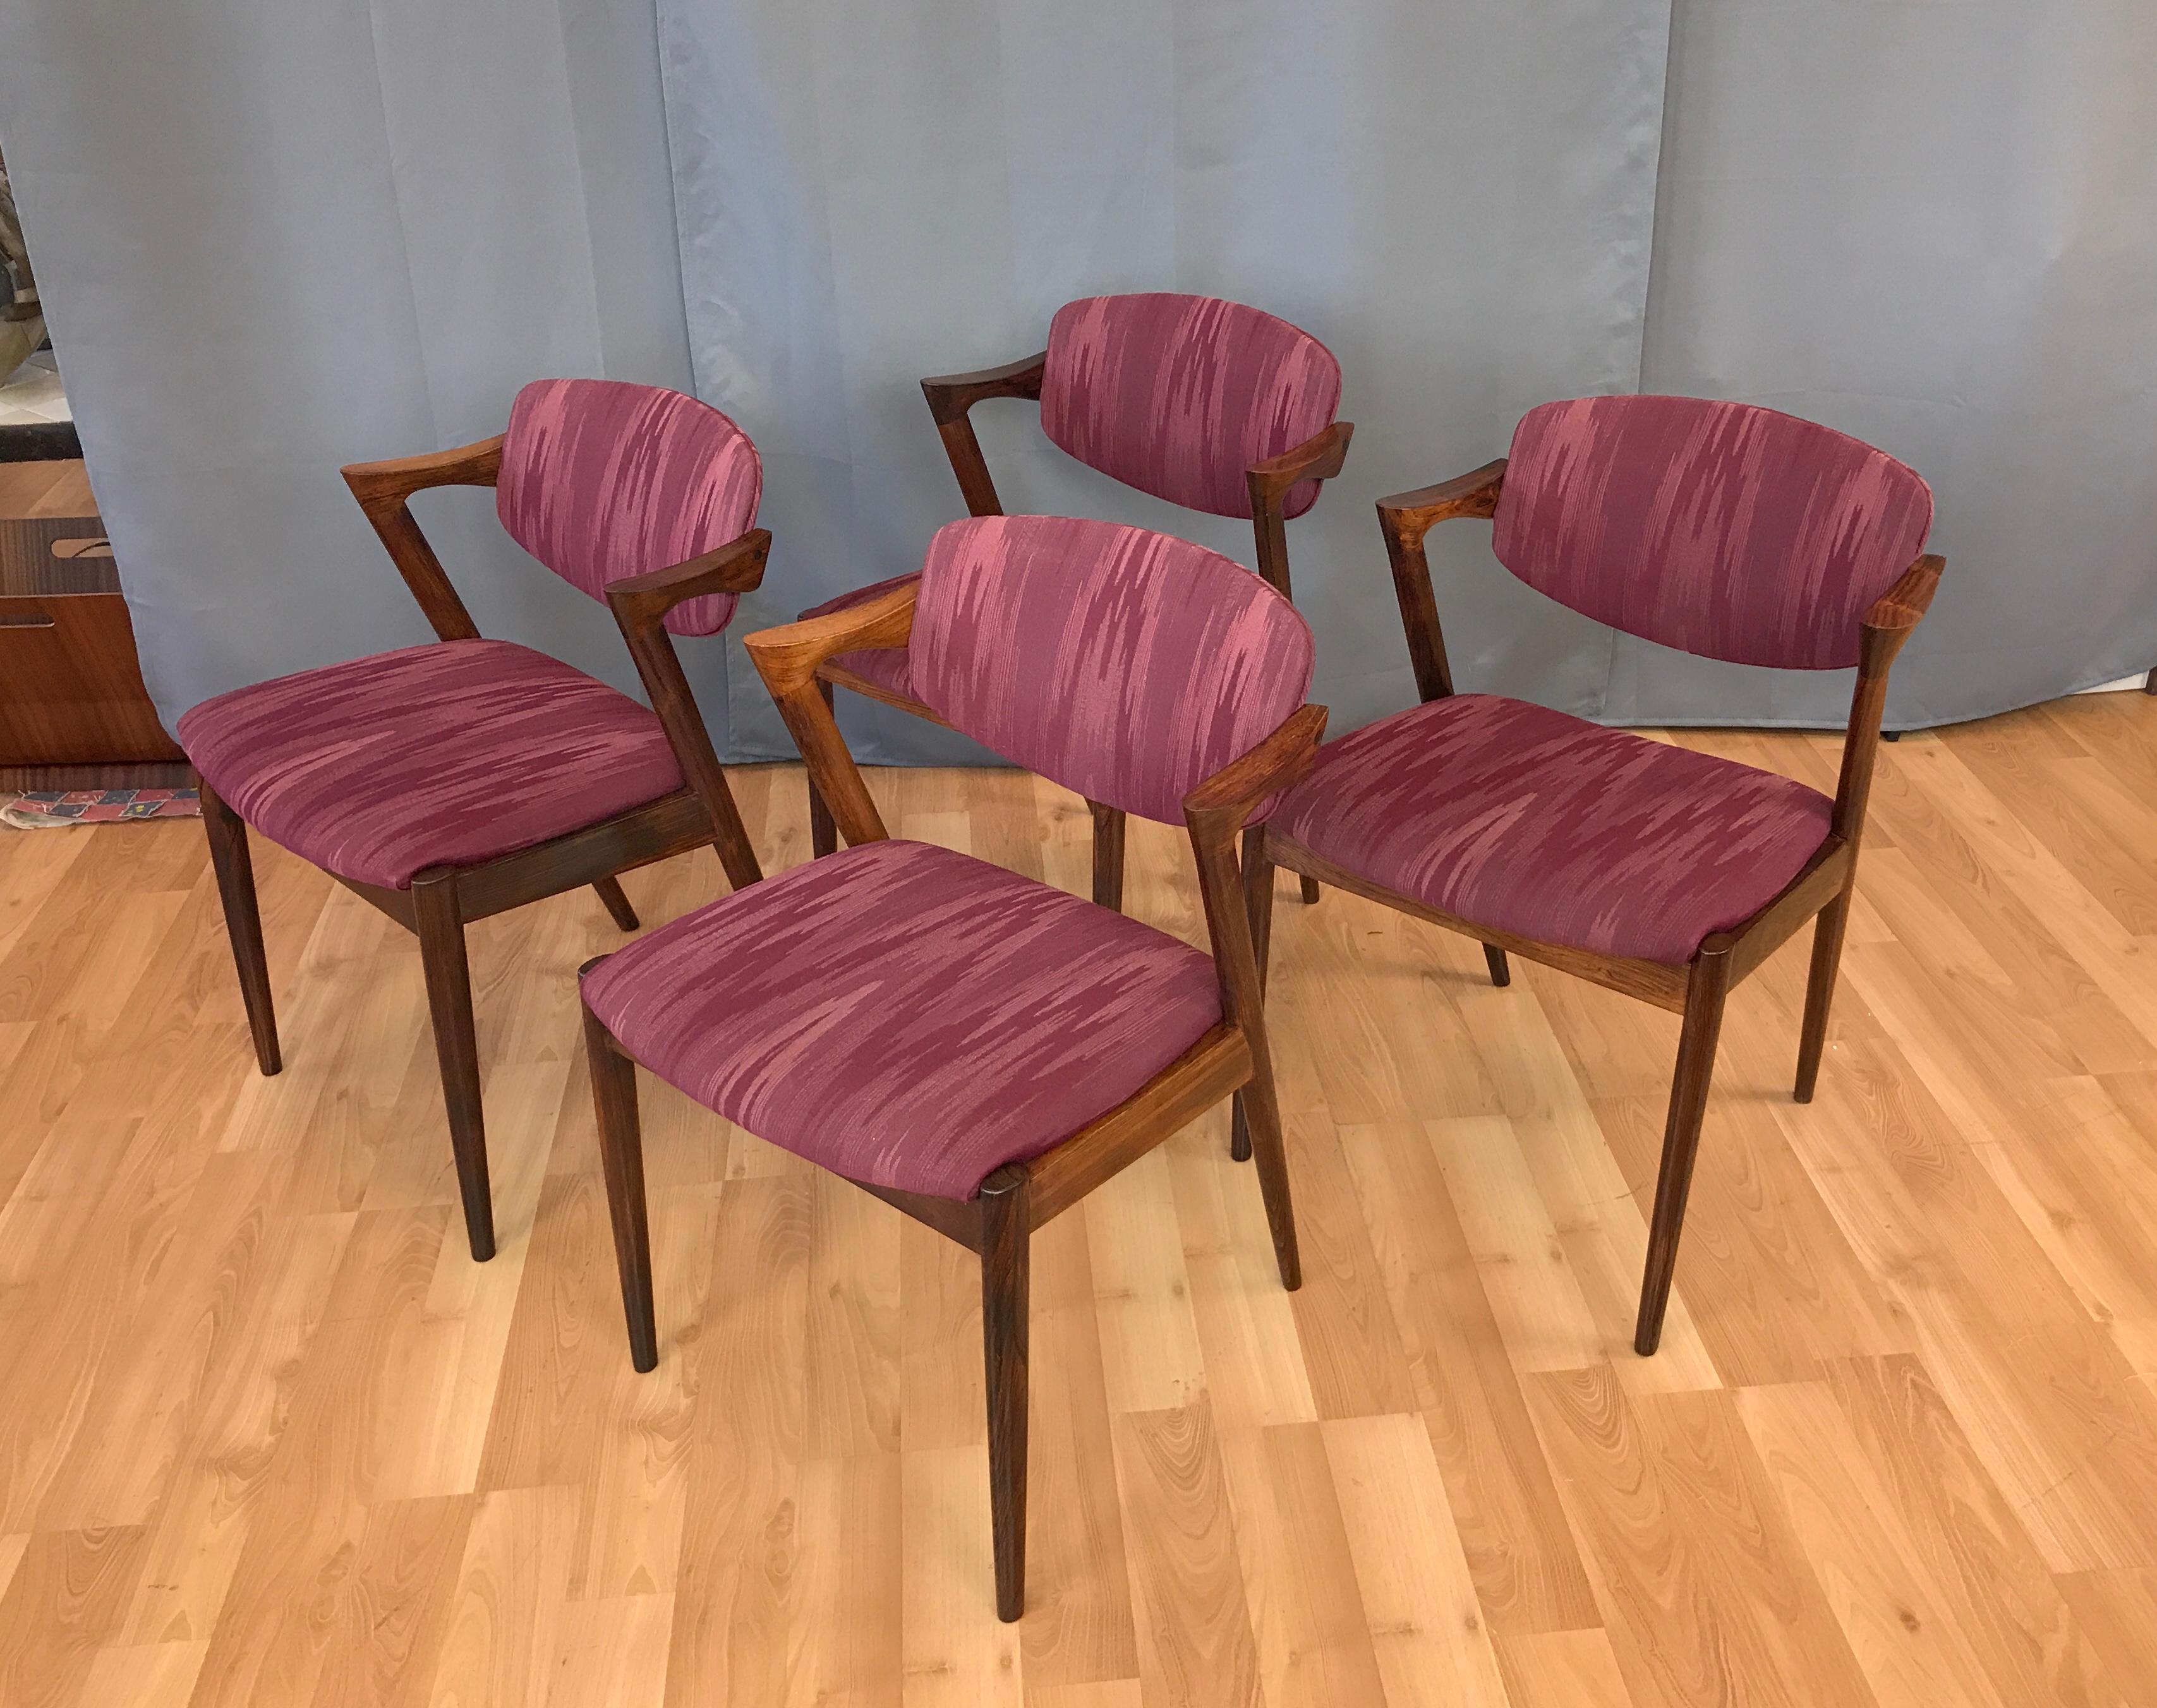 Four Kai Kristiansen designed Rosewood dining chairs with adjustable backrests, for Schou Andersen, Denmark. Their the “Model 42” his most celebrated design.